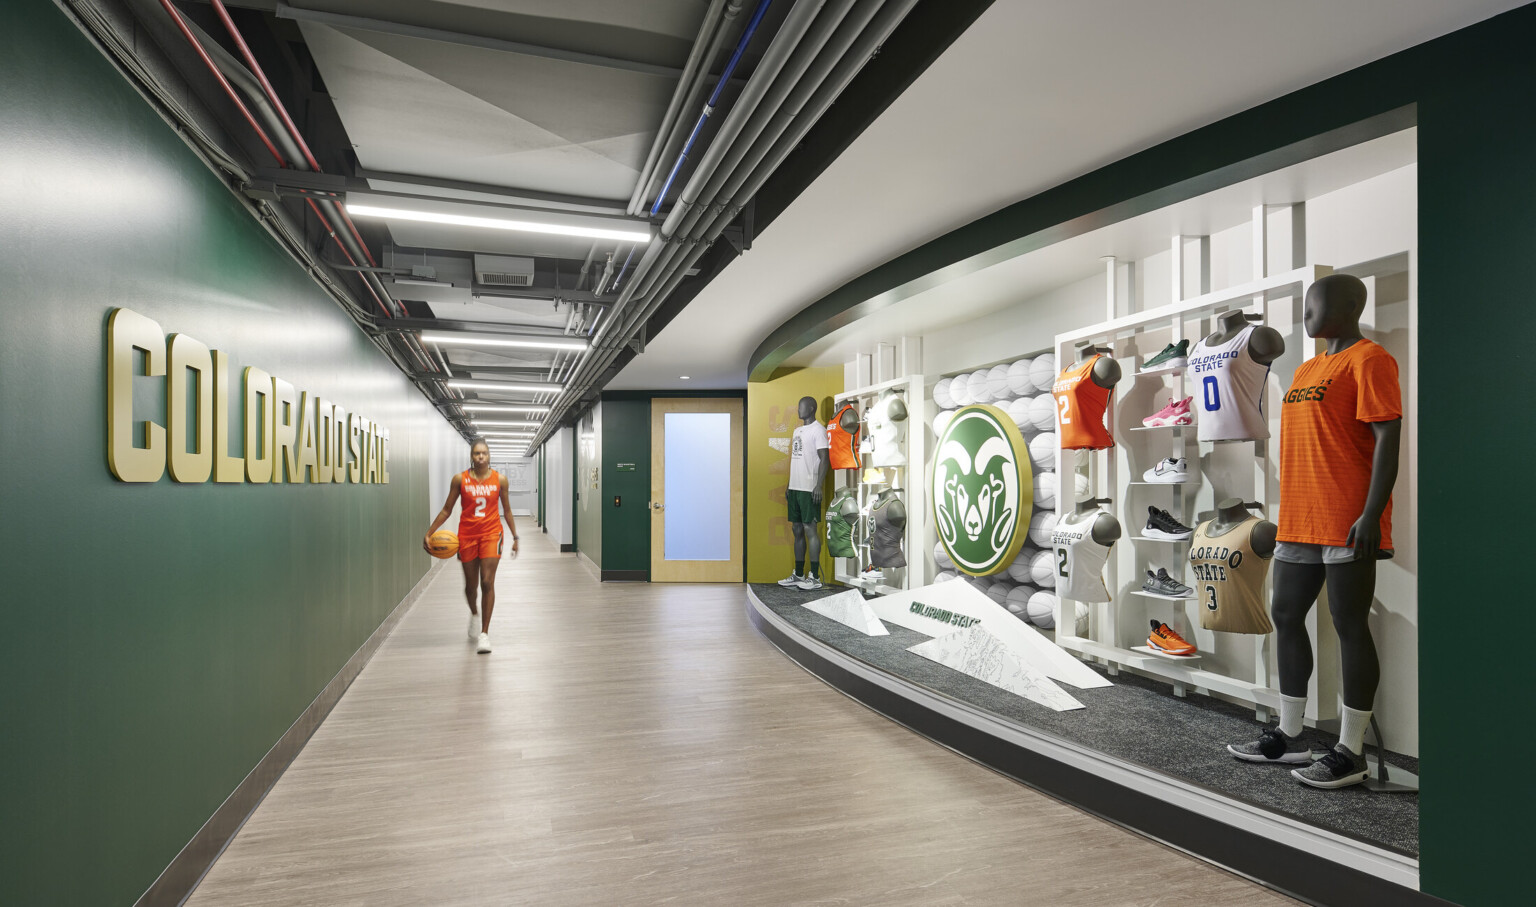 Hallway with dynamic gear display that highlights CSU and Rams Basketball, green walls with team signage, light wood flooring, mannequins wearing team branded athletic wear